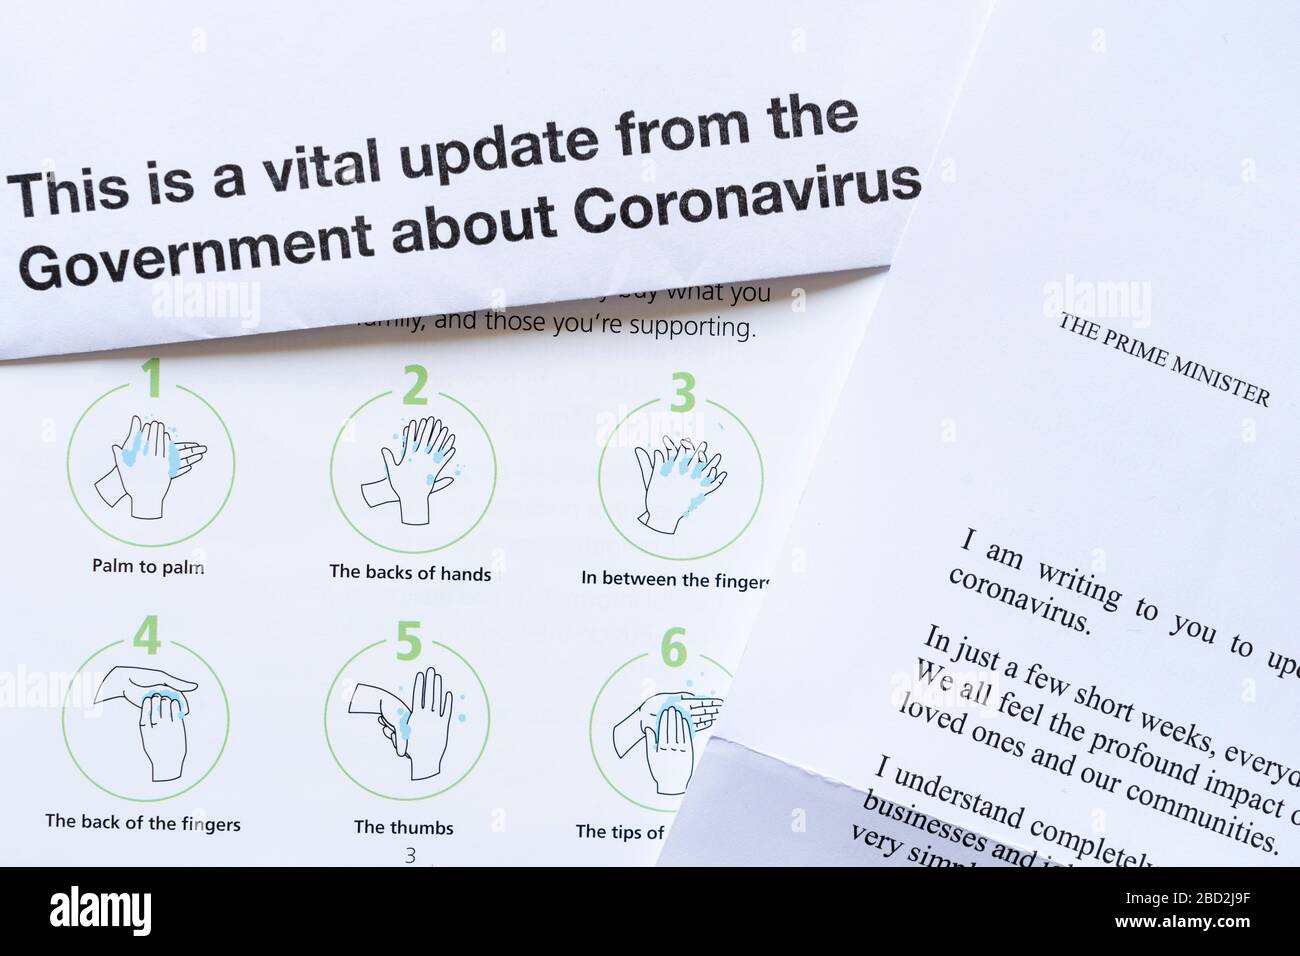 Official HM Government letter sent to all UK households as a vital update to the public about Coronavirus Covid-19 during the pandemic, April 2020 Stock Photo